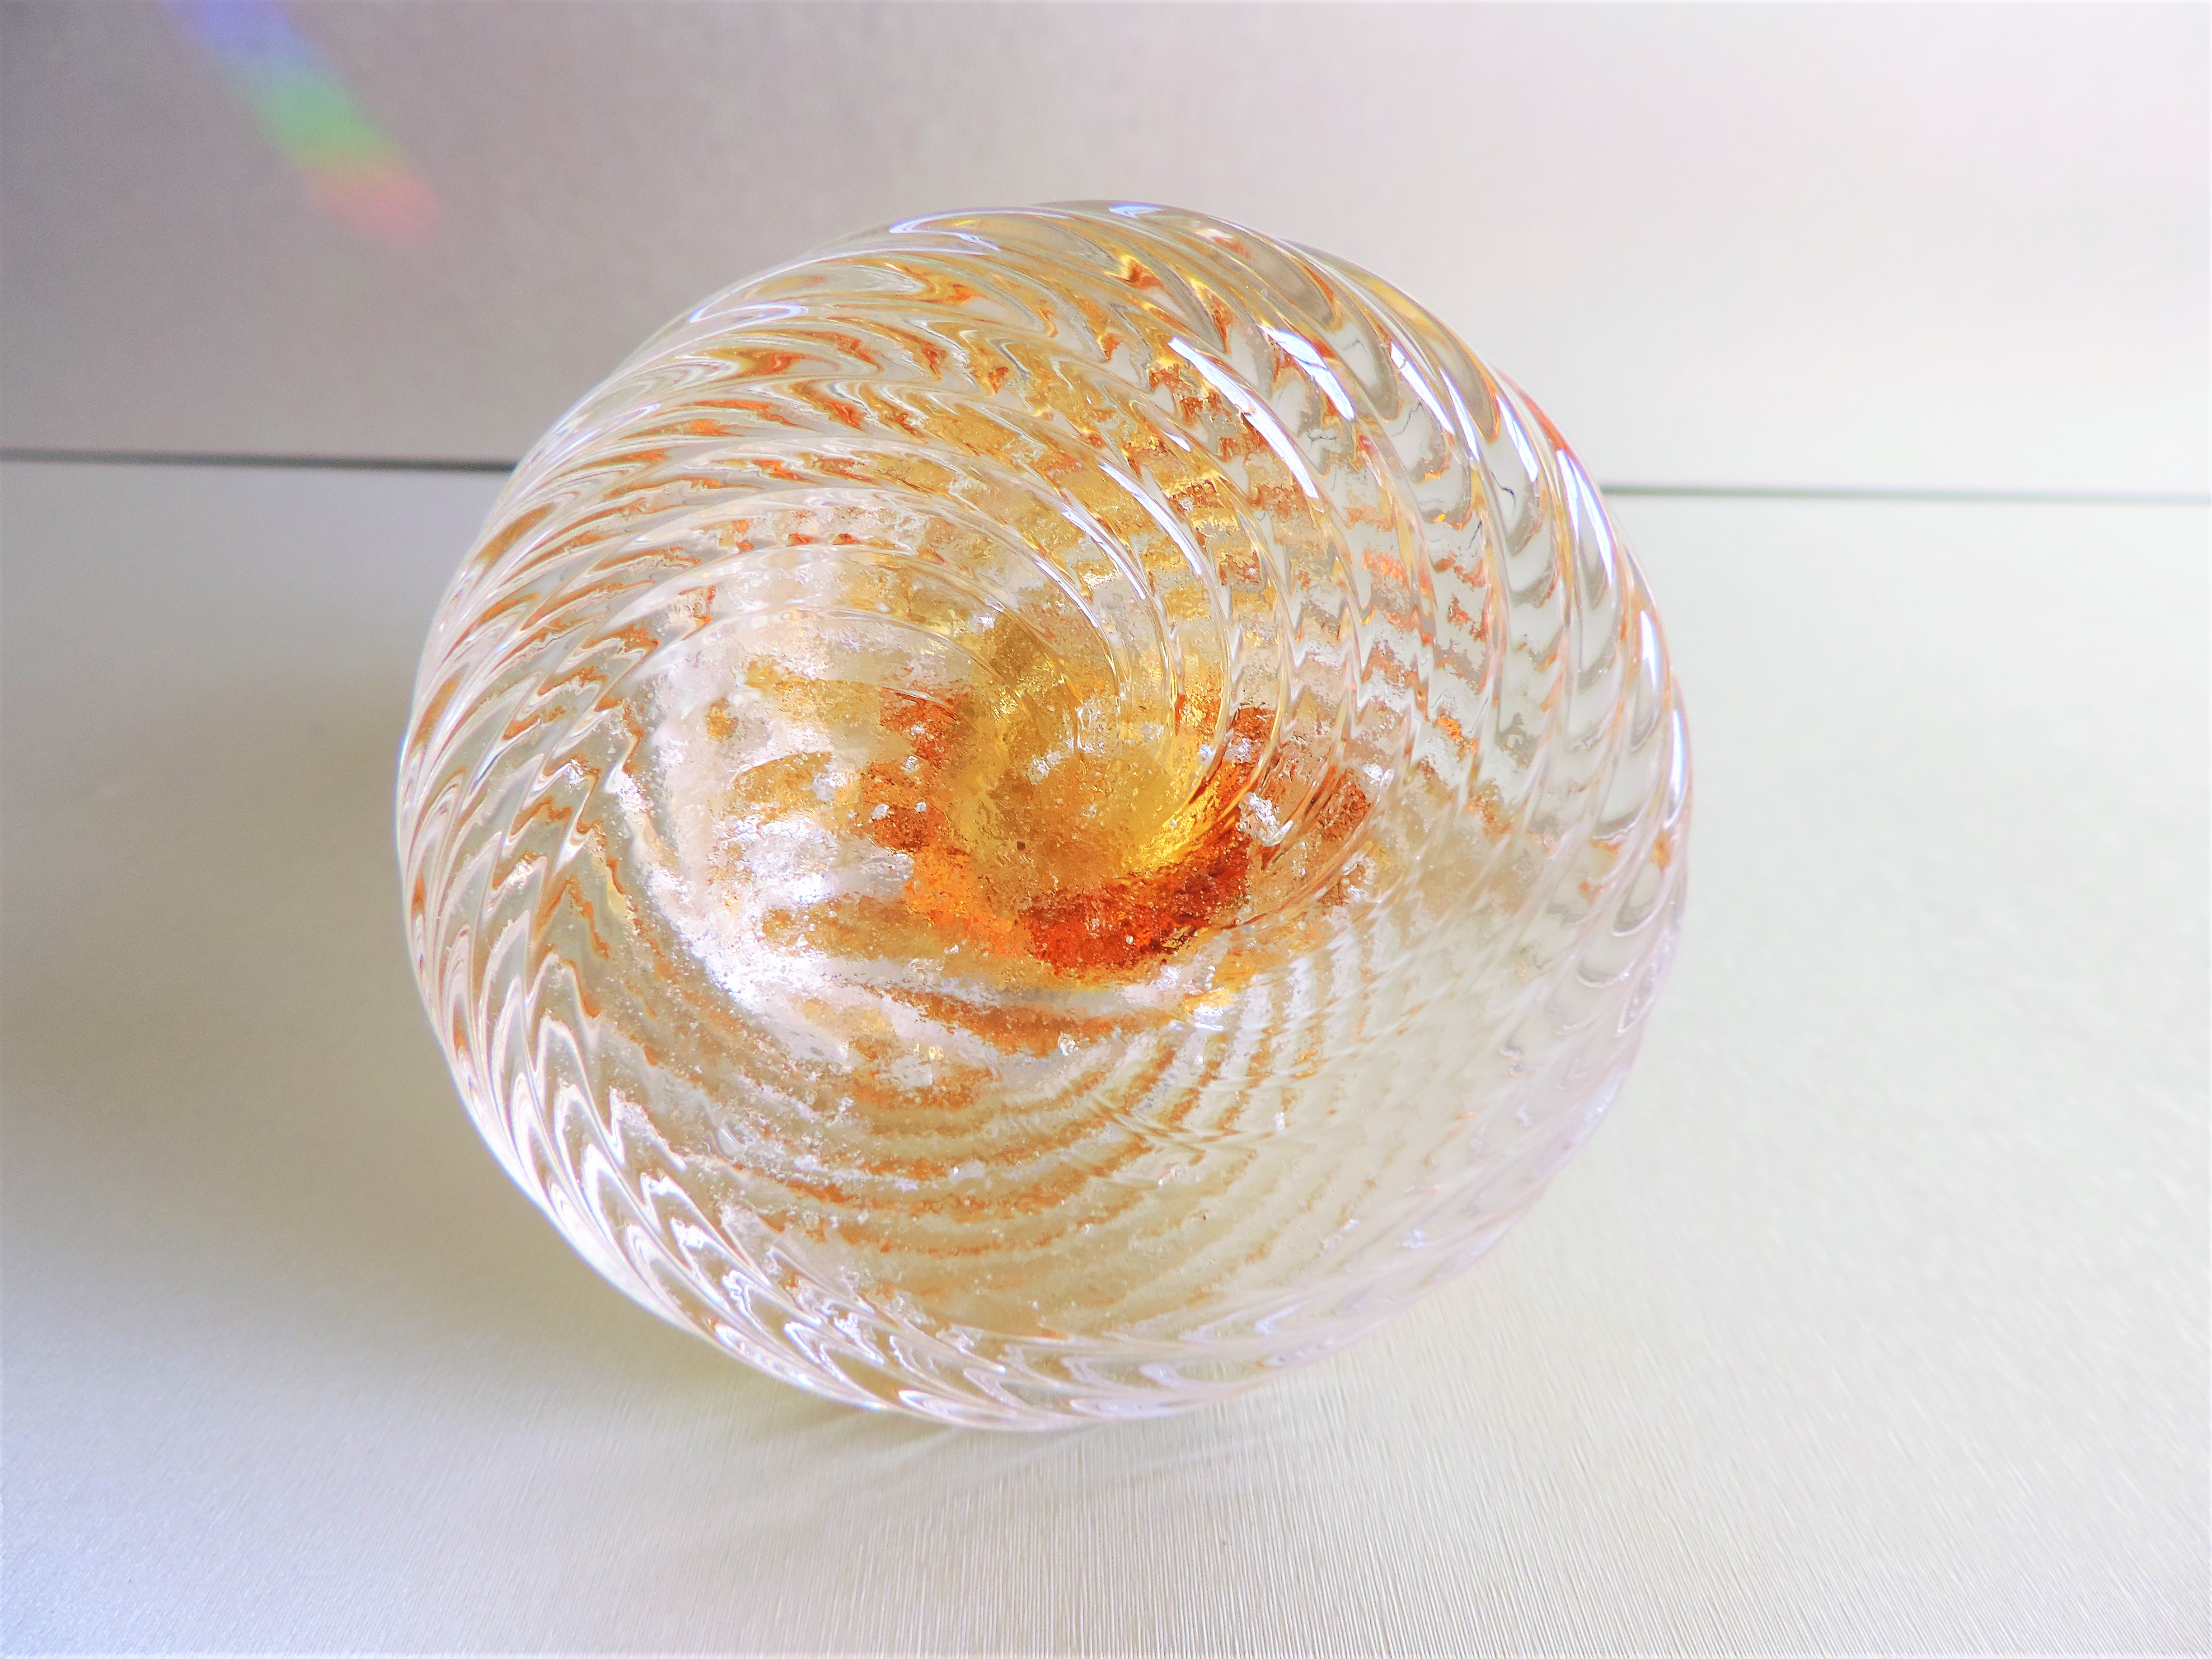 Murano Sommerso Amber Bullicante Glass Sculpture 27cm High - Image 3 of 4